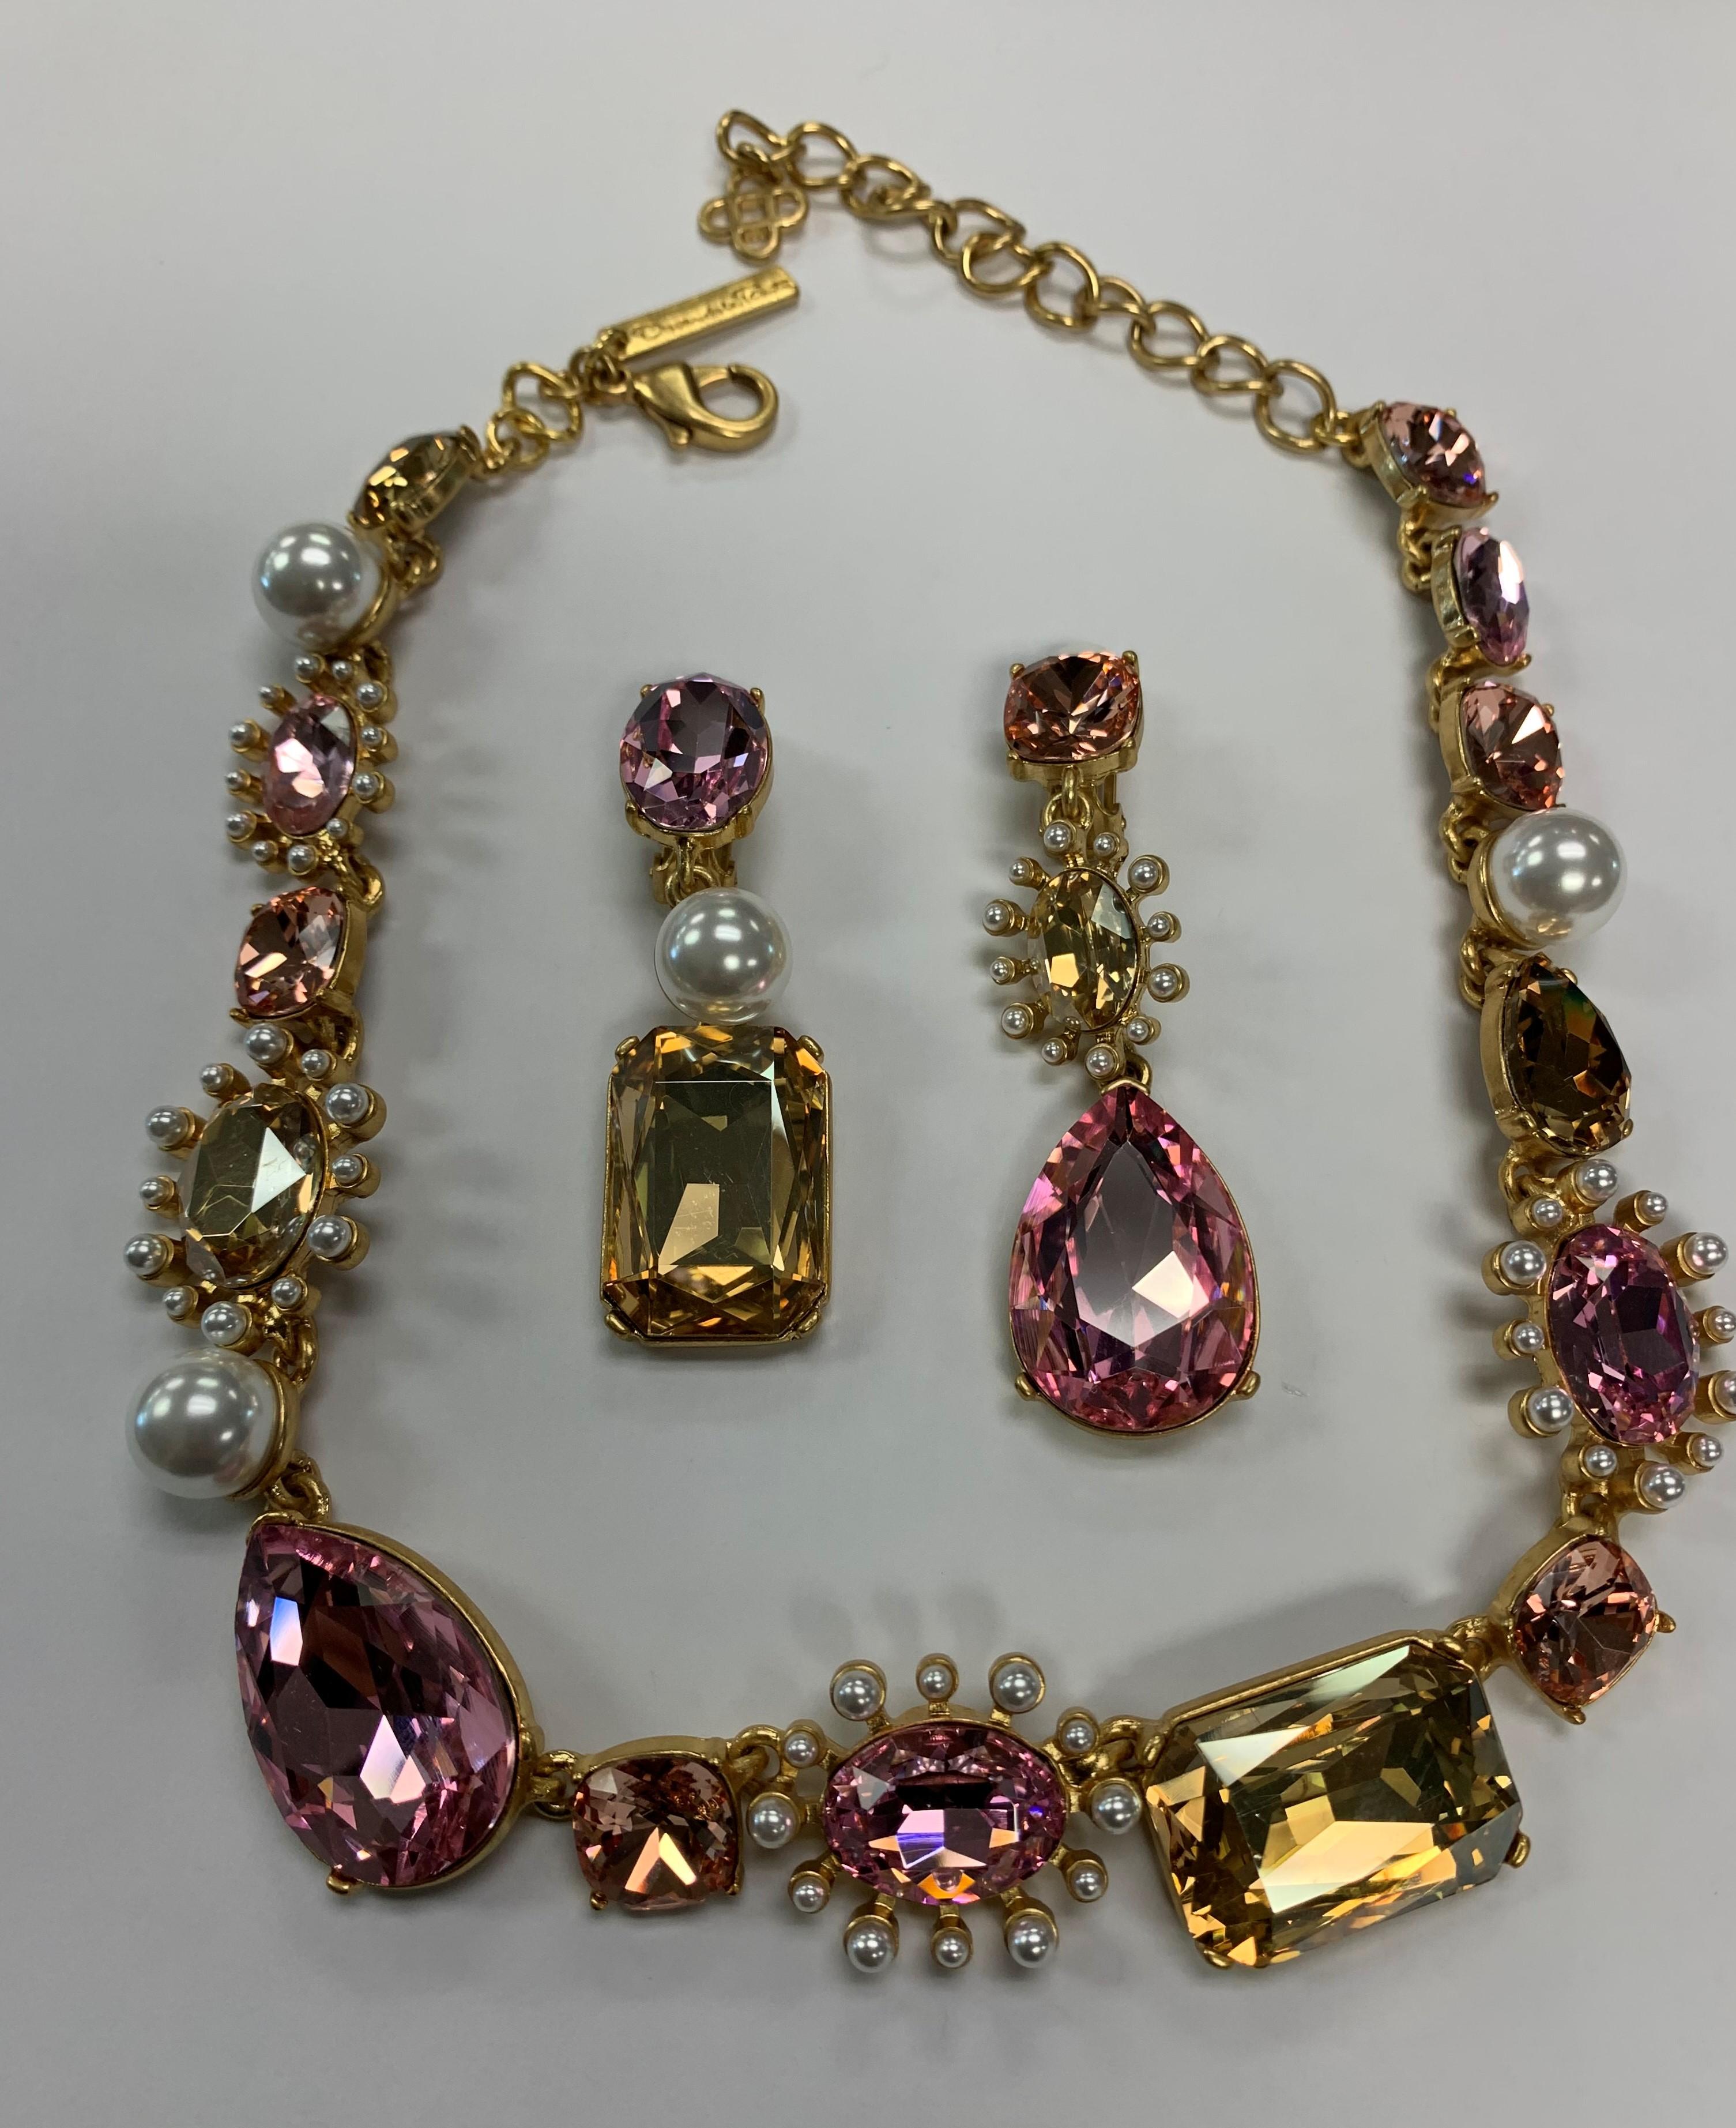 Stunning signed Oscar de la Renta Faux Pearl and Pink Crystal Necklace and matching Earrings with the Designer Signature; necklace measures approx. Approx. 20